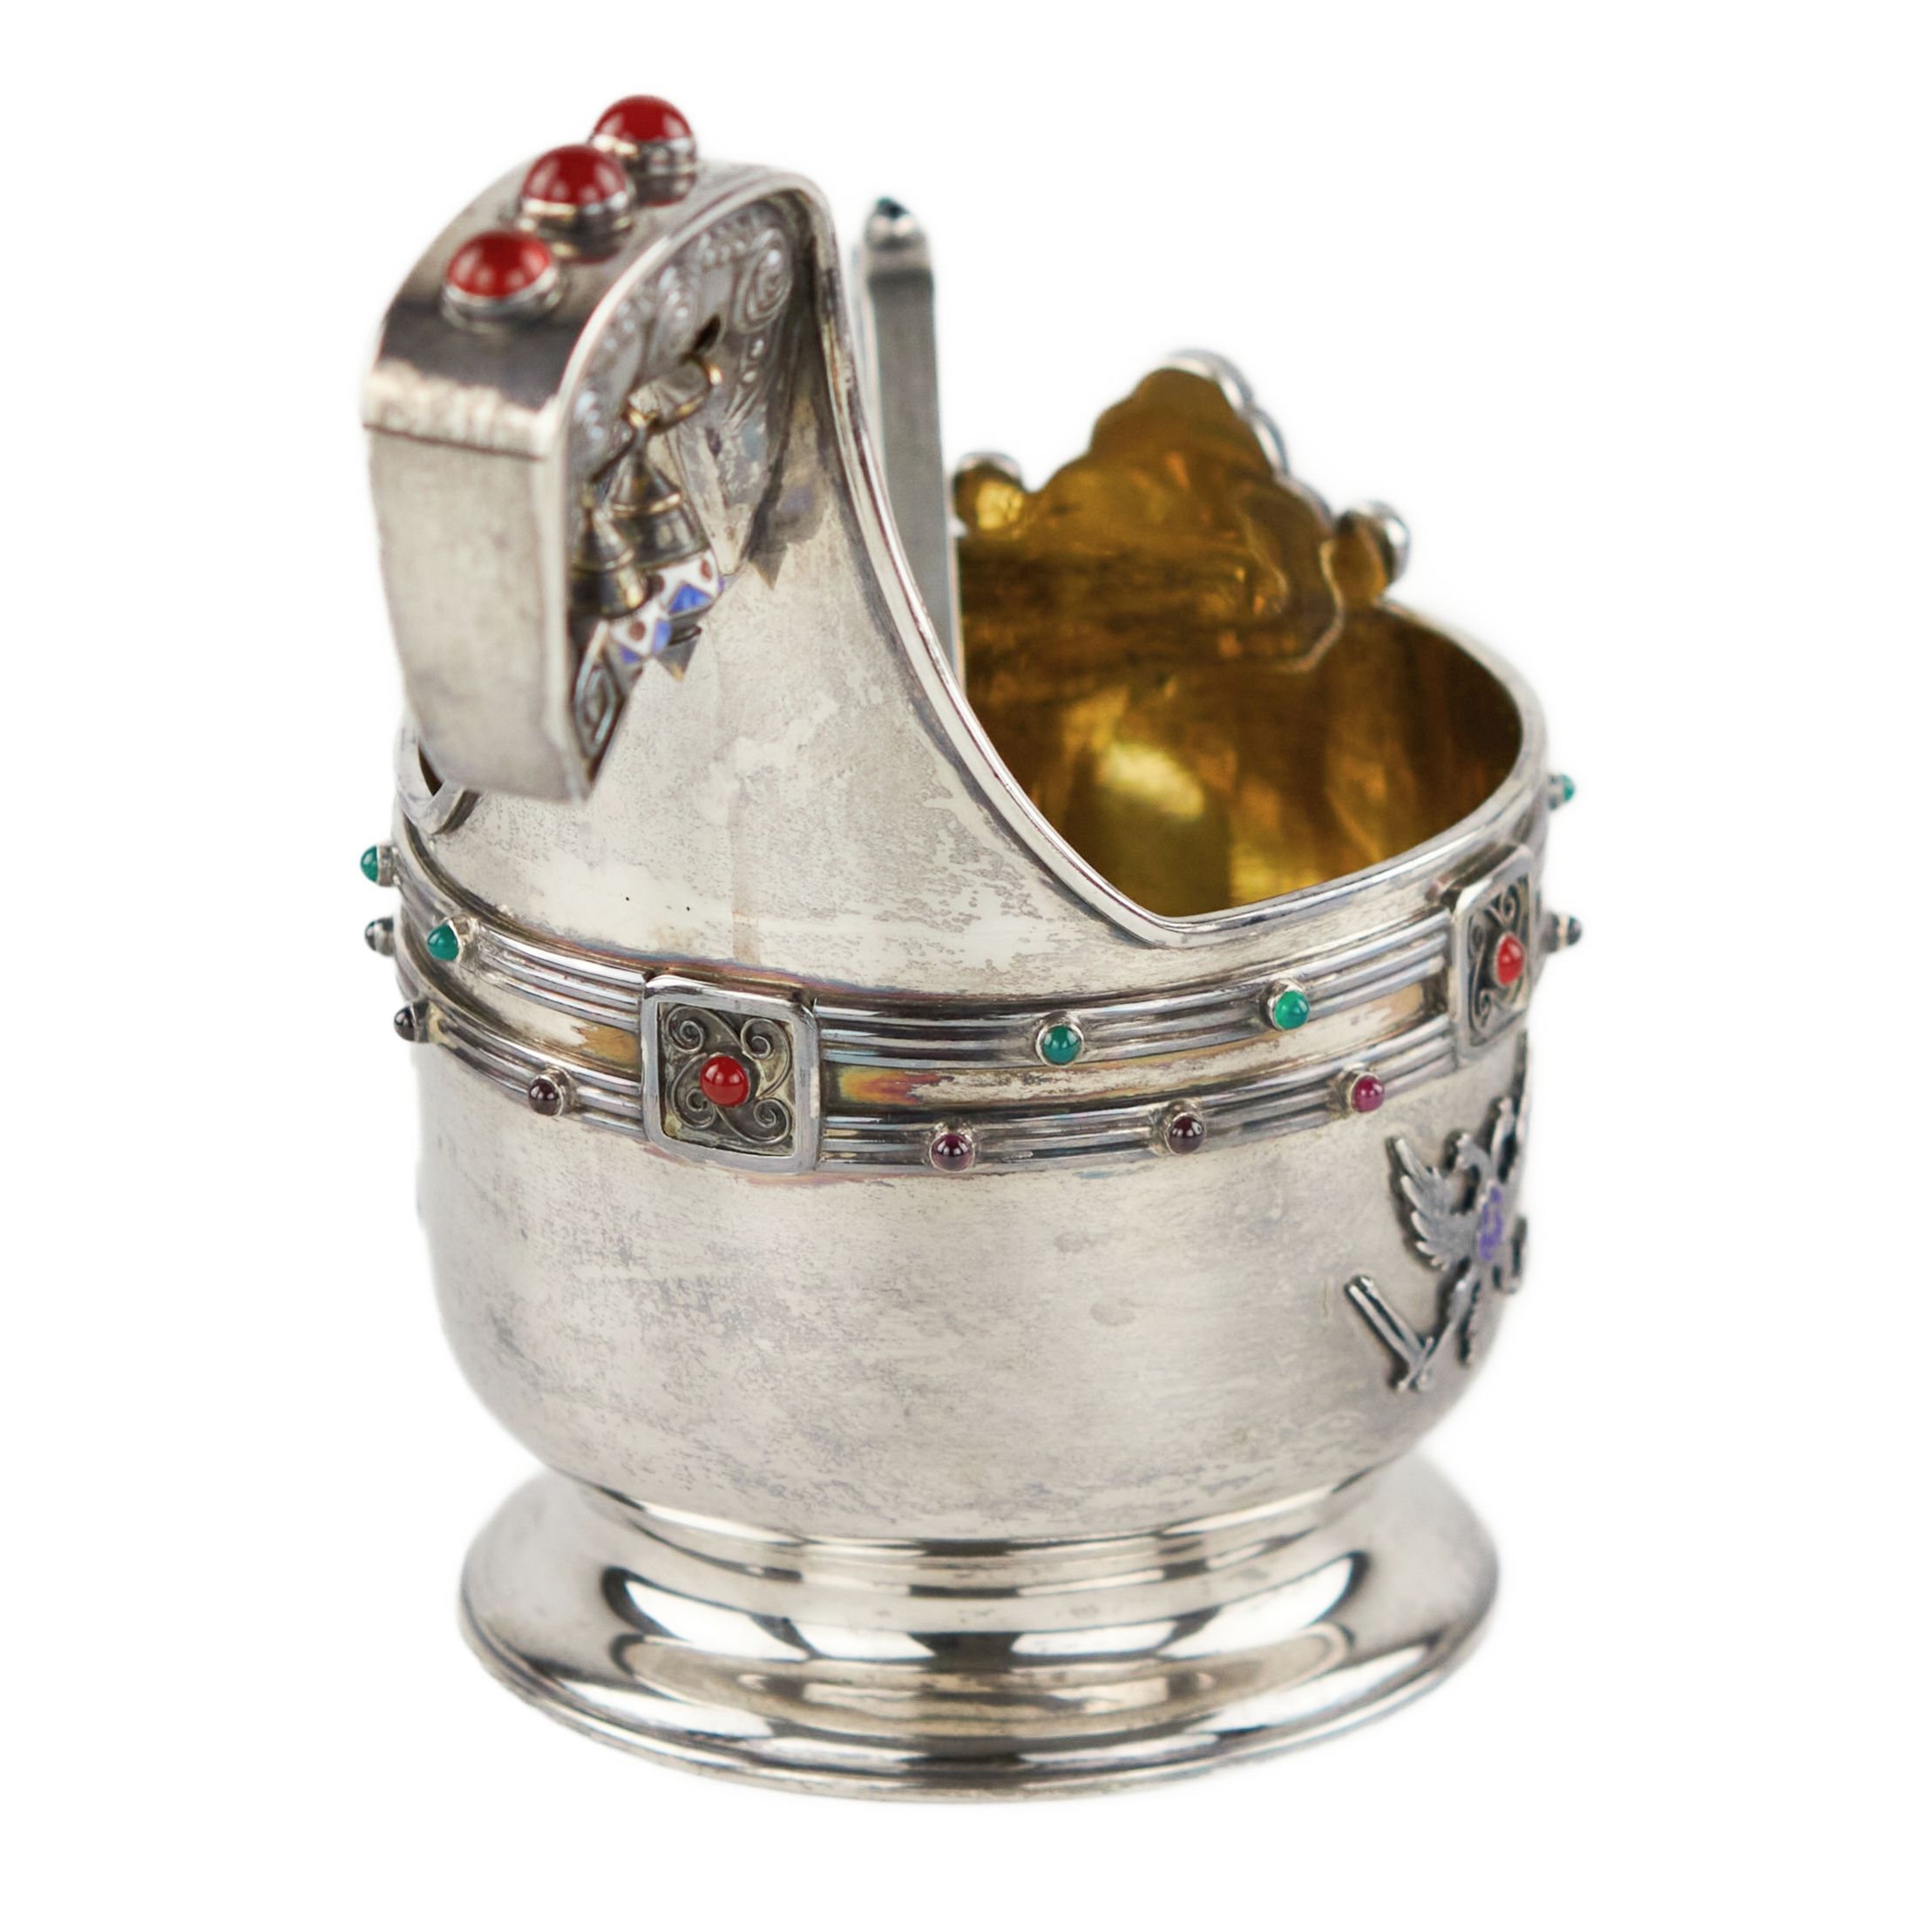 Large silver kovsh in Art Nouveau style by Faberge. Yuliy Rappoport. Early 20th century. - Image 3 of 9